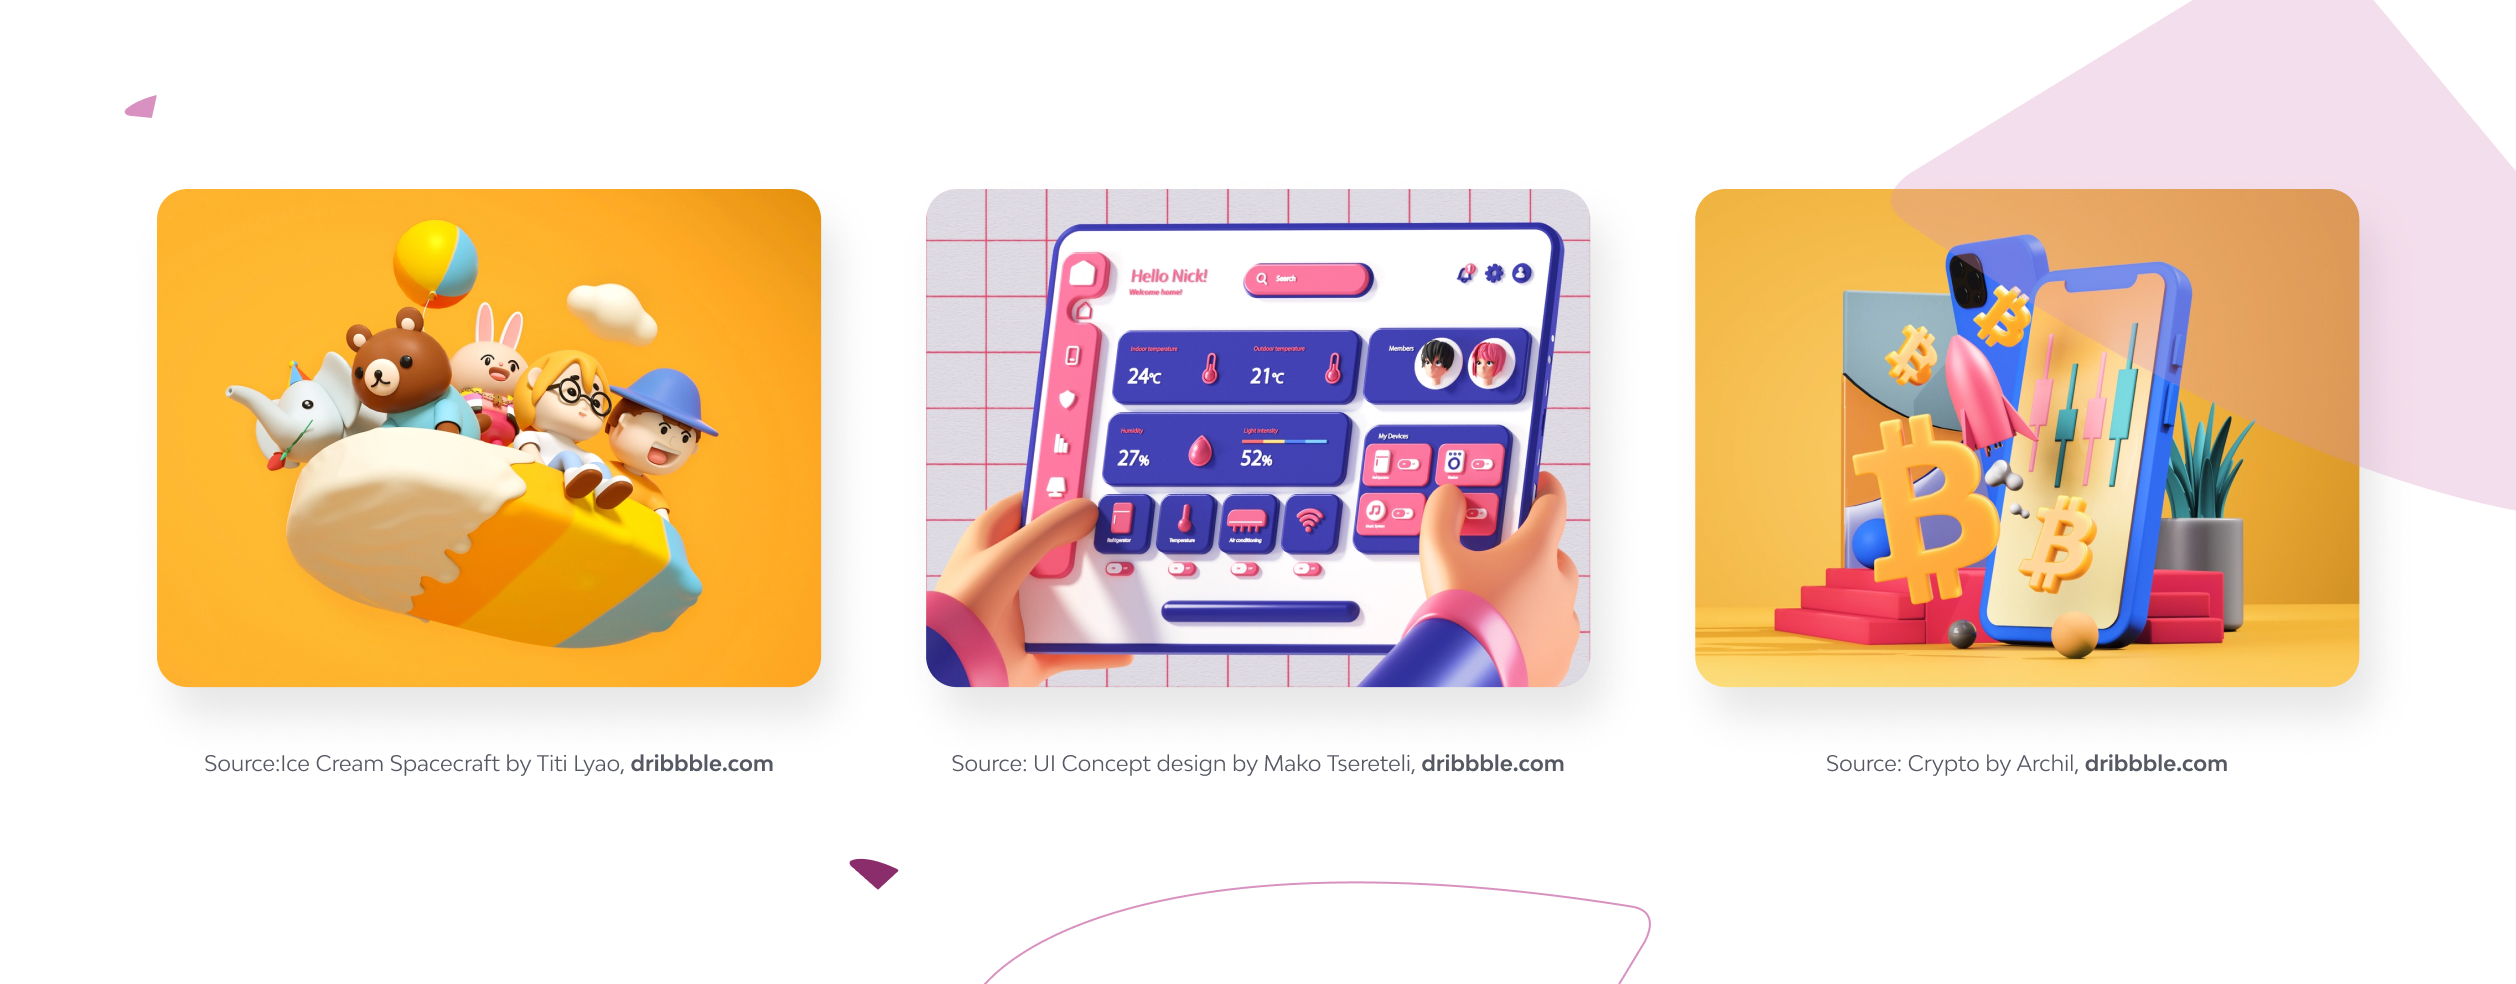 15 Upcoming UI/UX Design Trends For 2023 8